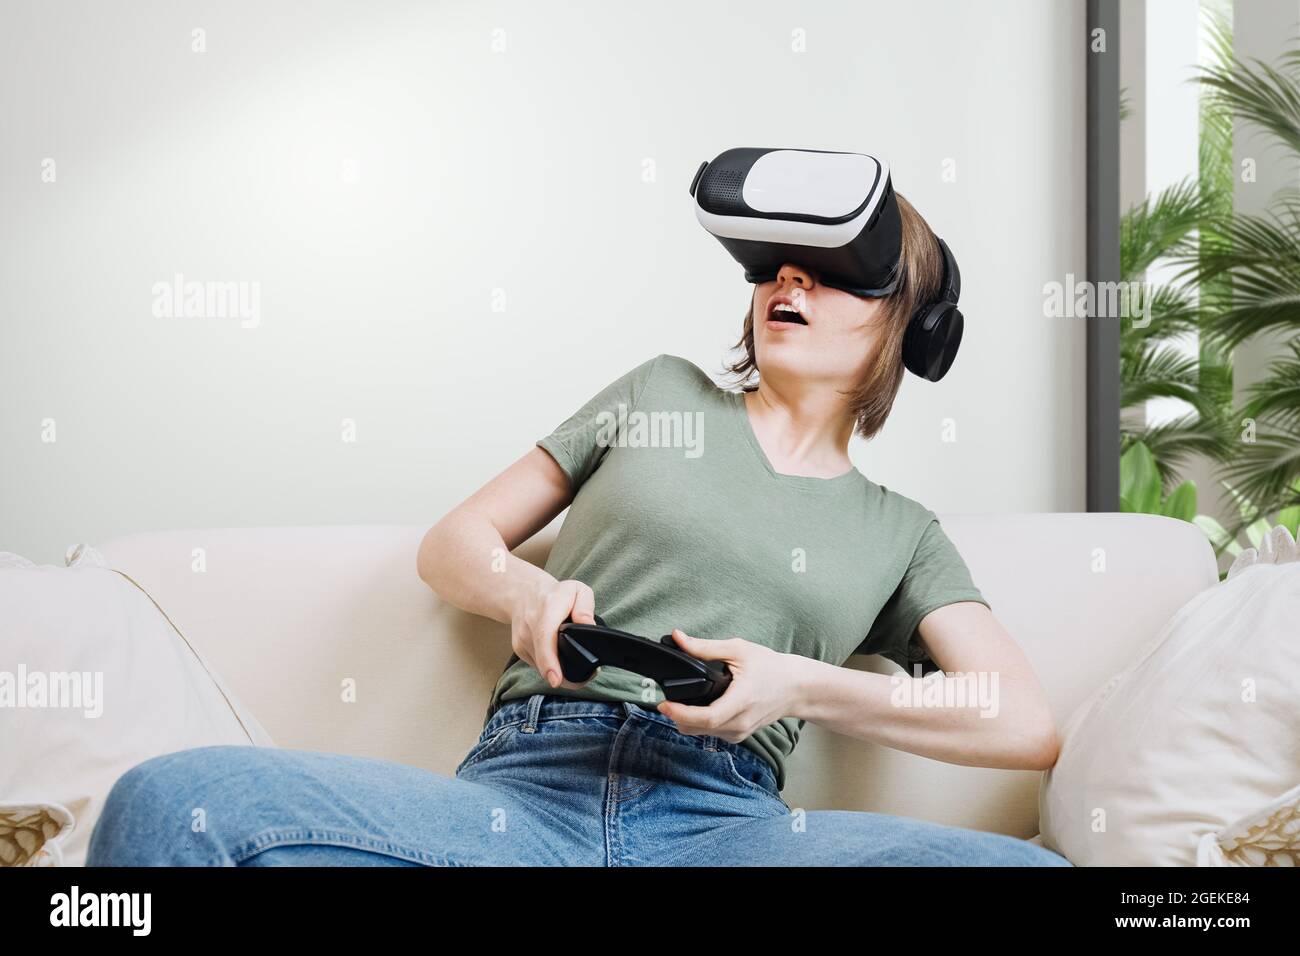 Excited Attractive Woman Gaming With Virtual Reality Headset Or Goggles